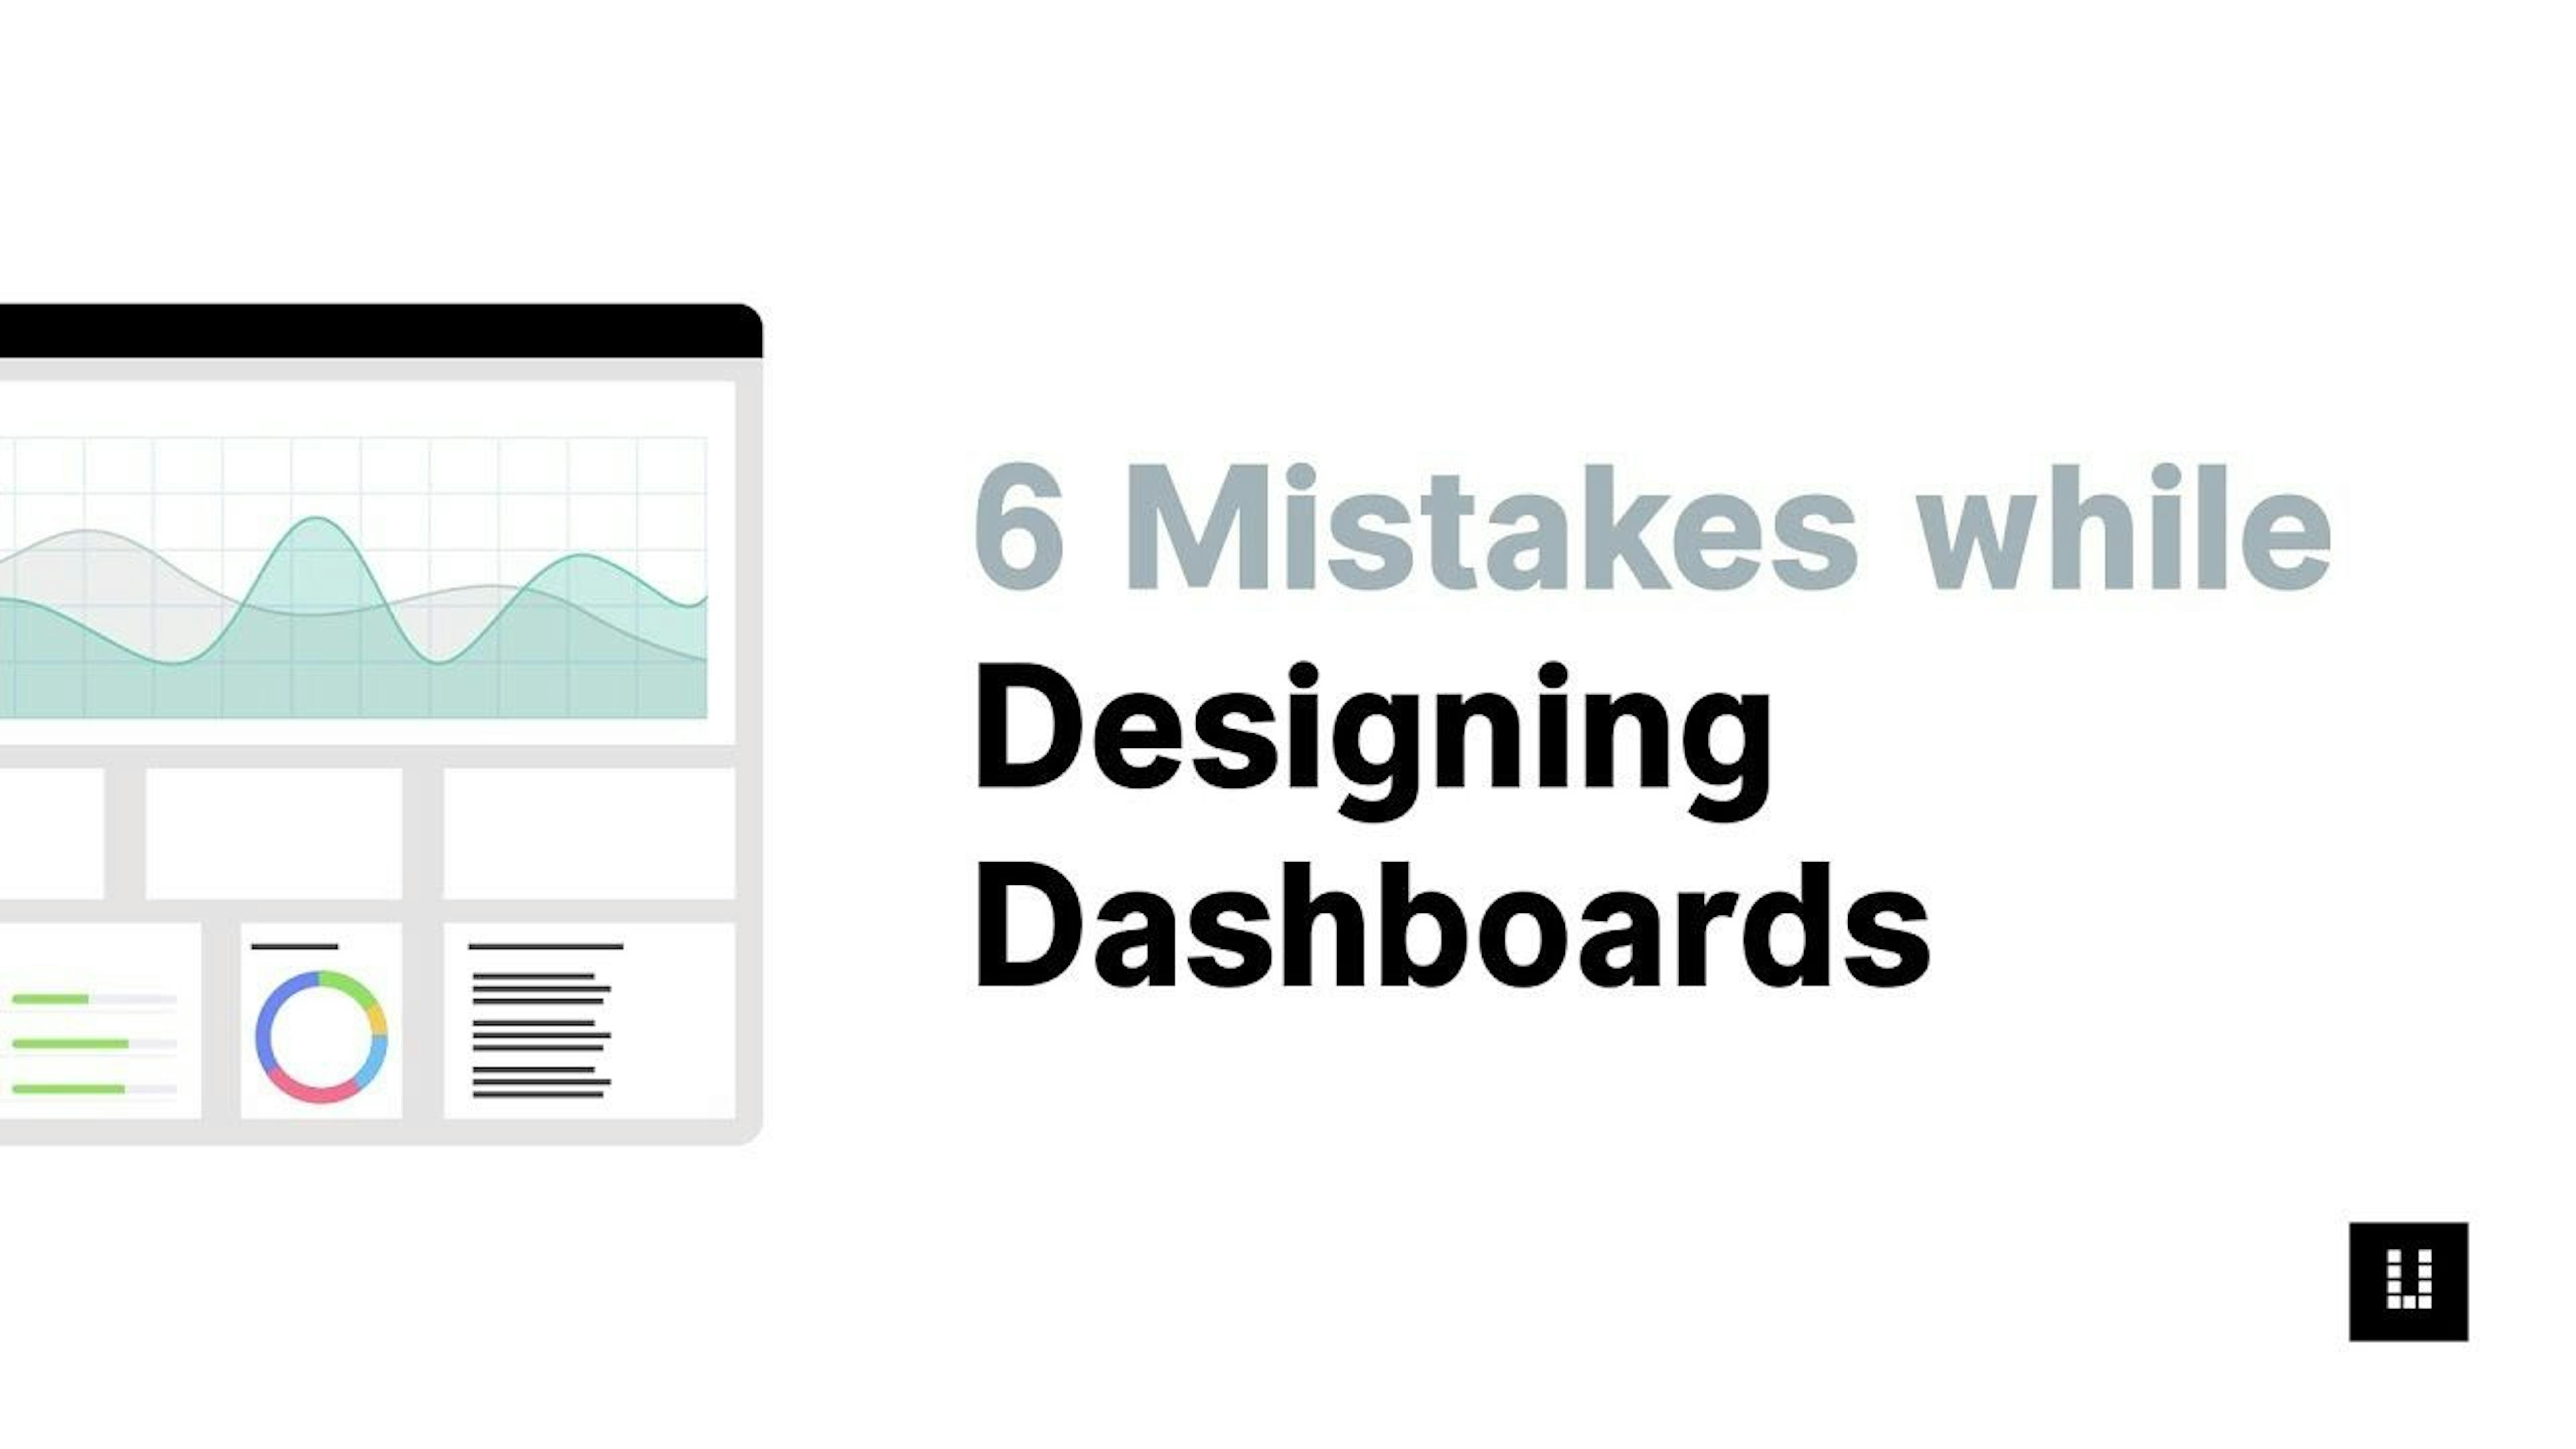 featured image - Designing a Dashboard? - Don't Make These 6 Common Mistakes